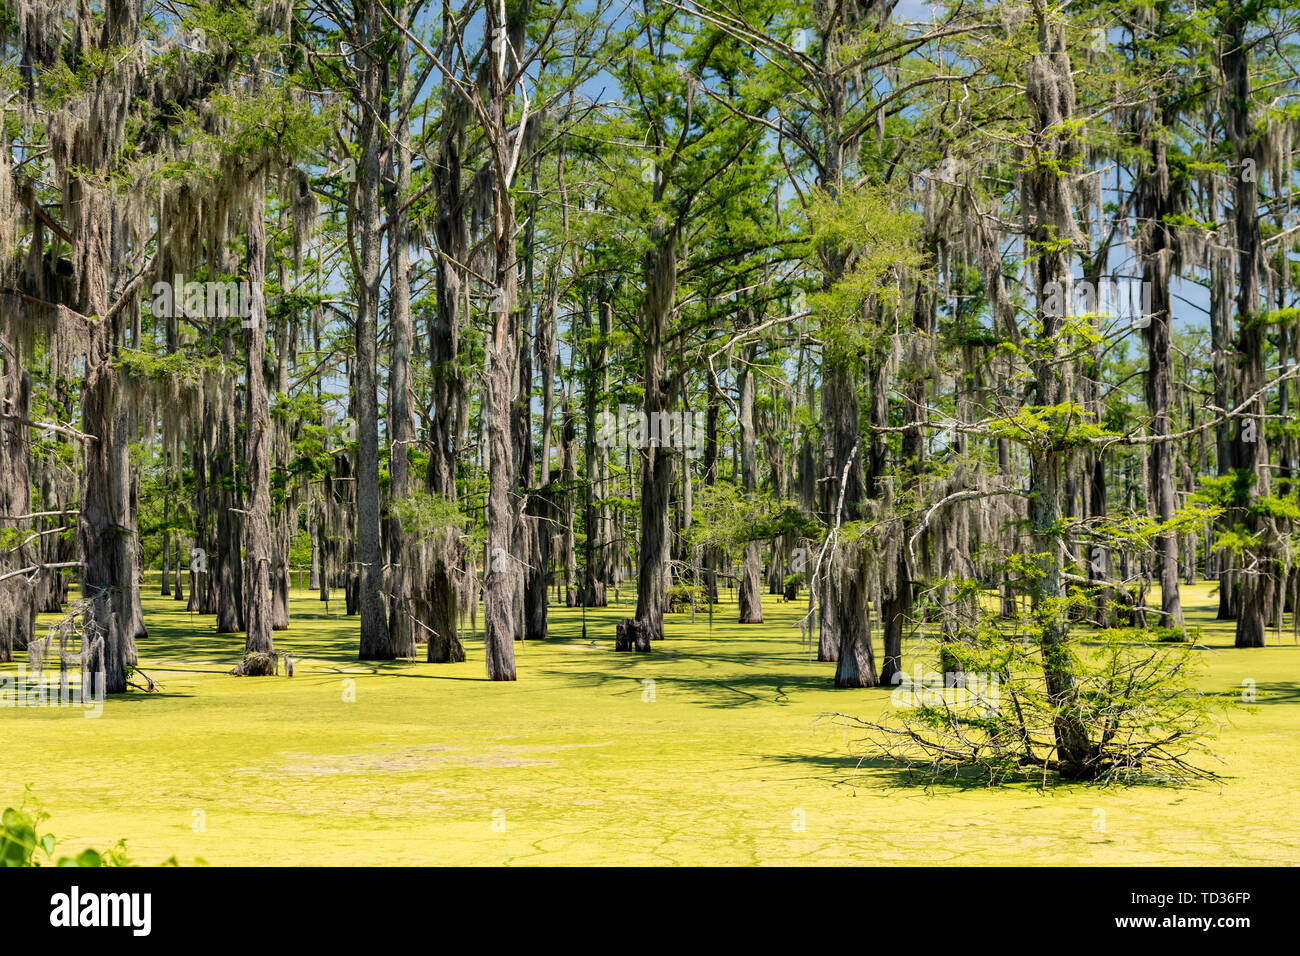 Yazoo City, Mississippi - Spanish moss growing on bald cypress trees in a swamp in the Mississippi Delta. Stock Photo